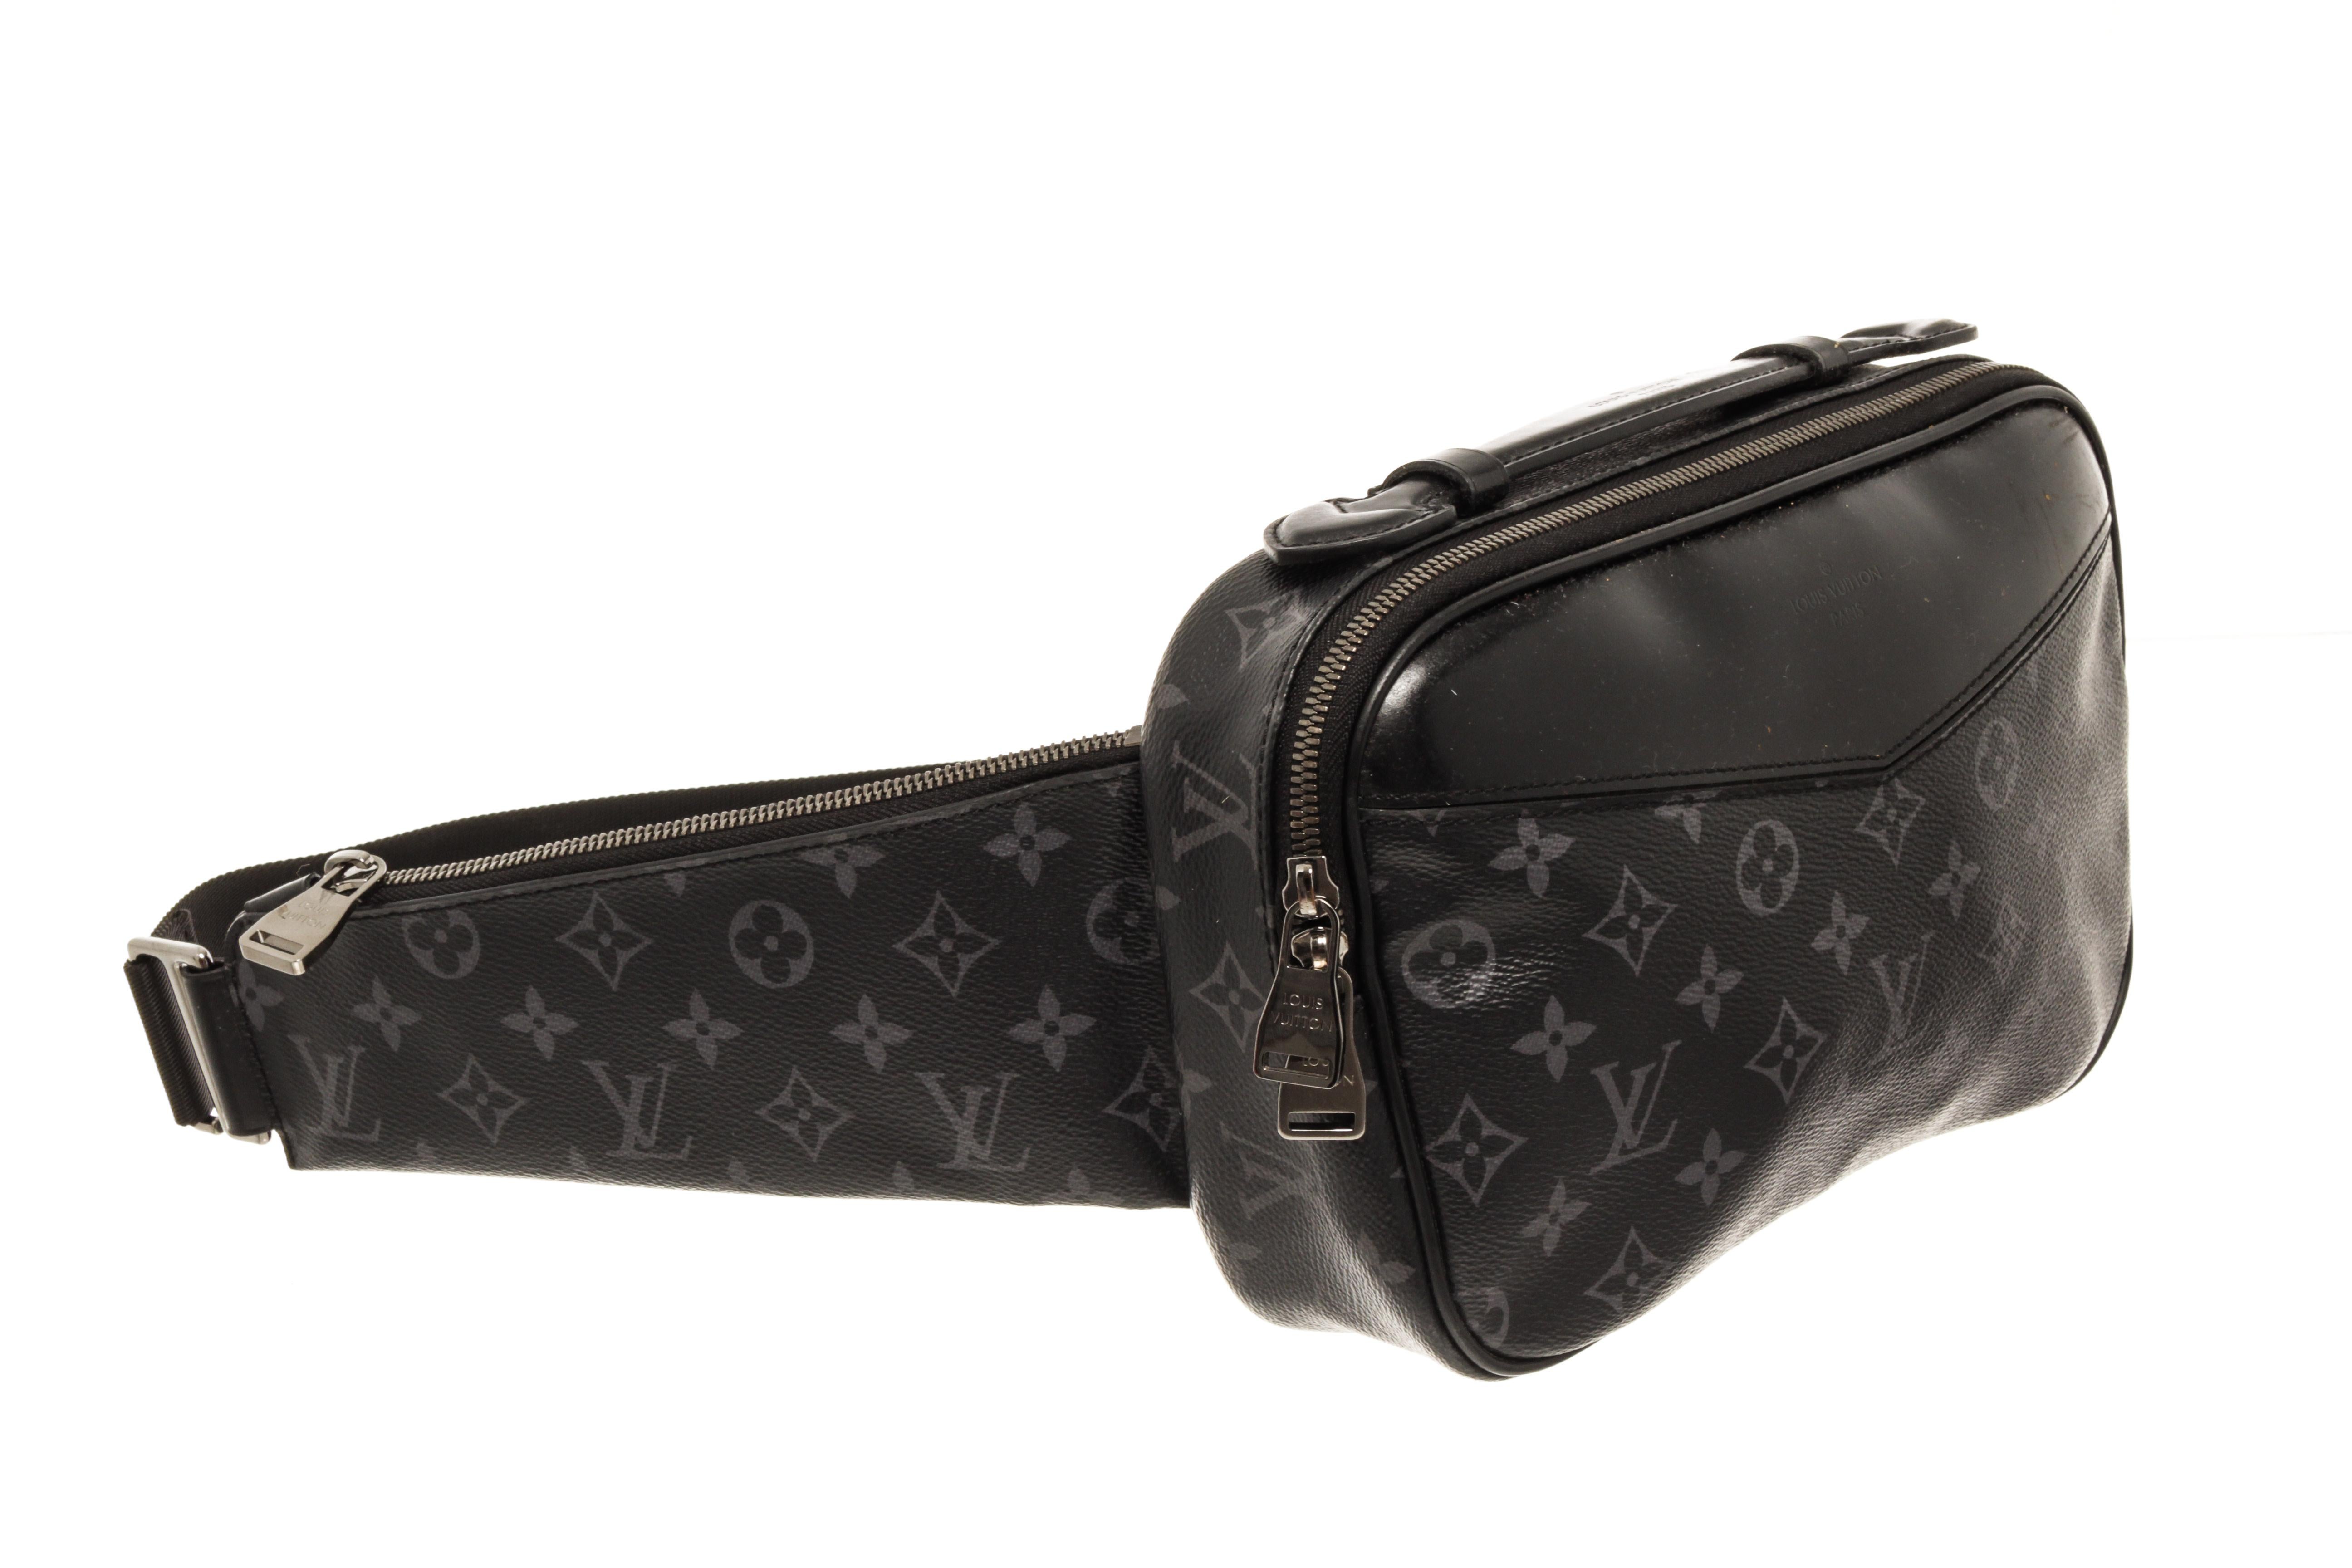 Louis Vuitton Monogram Eclipse Canvas Bumbag In Good Condition For Sale In Irvine, CA